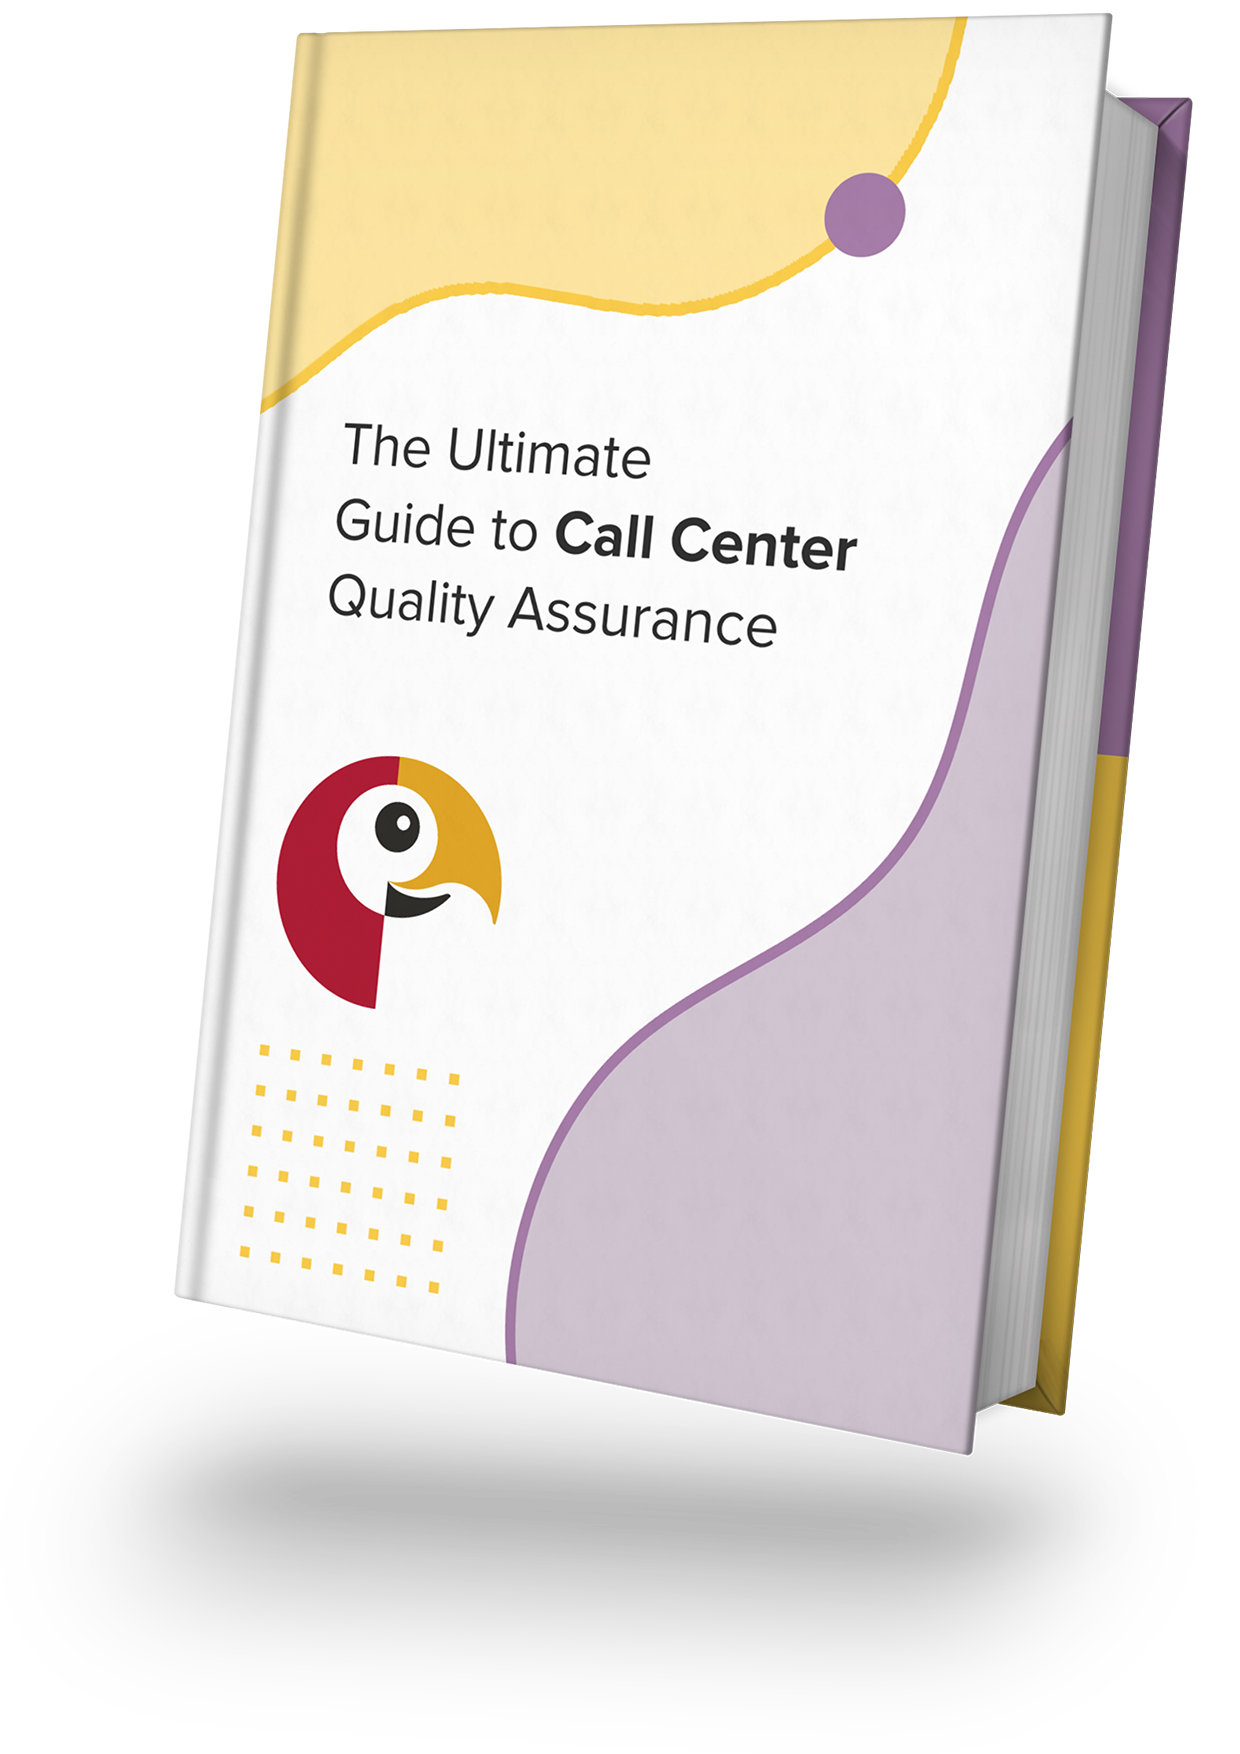 The Ultimate Guide to Call Center Quality Assurance book